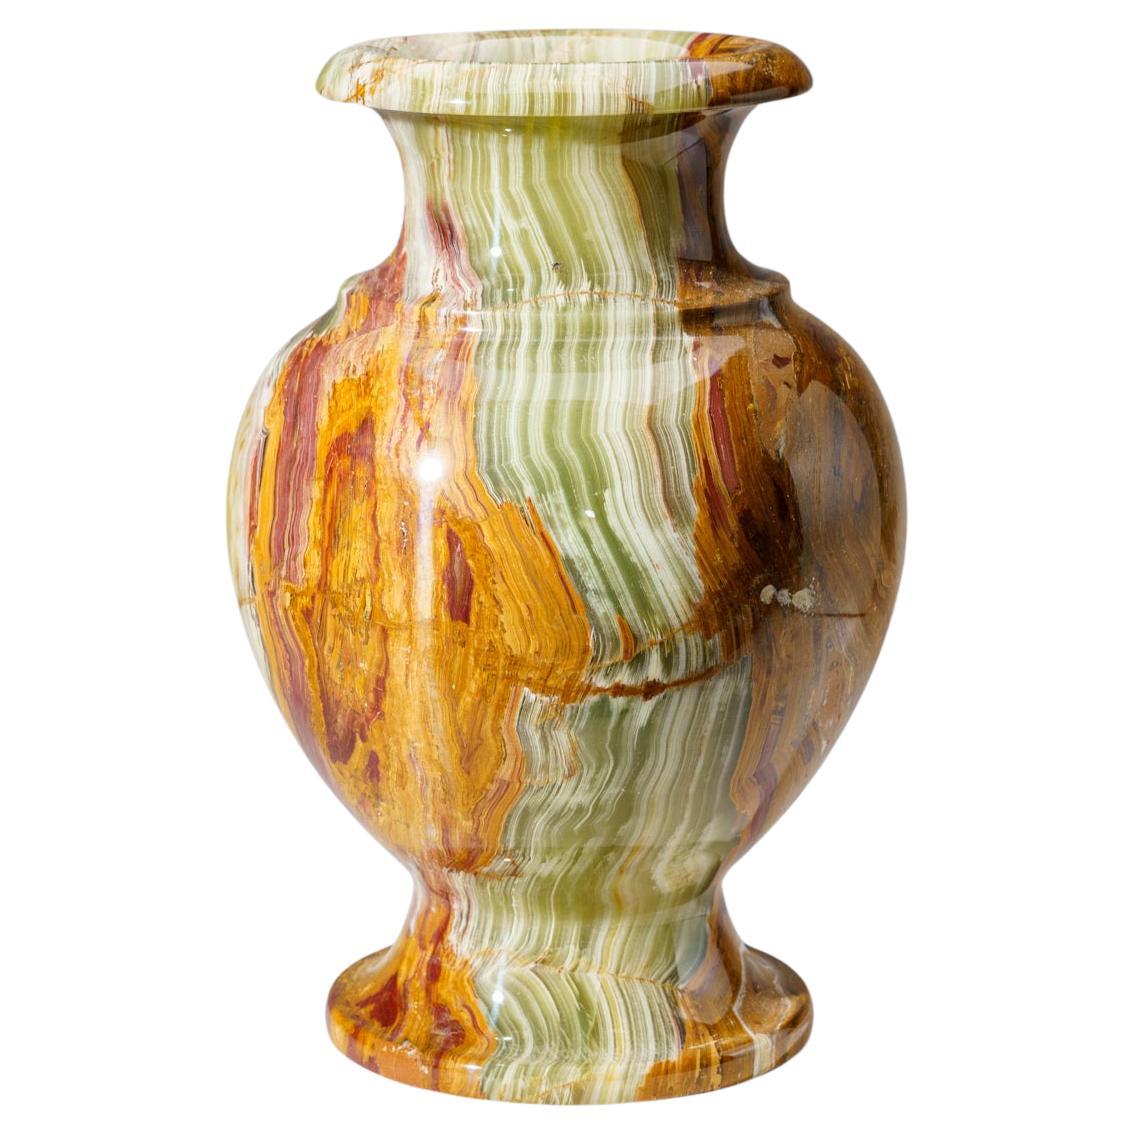 Genuine Polished Onyx Flower Vase from Mexico (18 lbs) For Sale